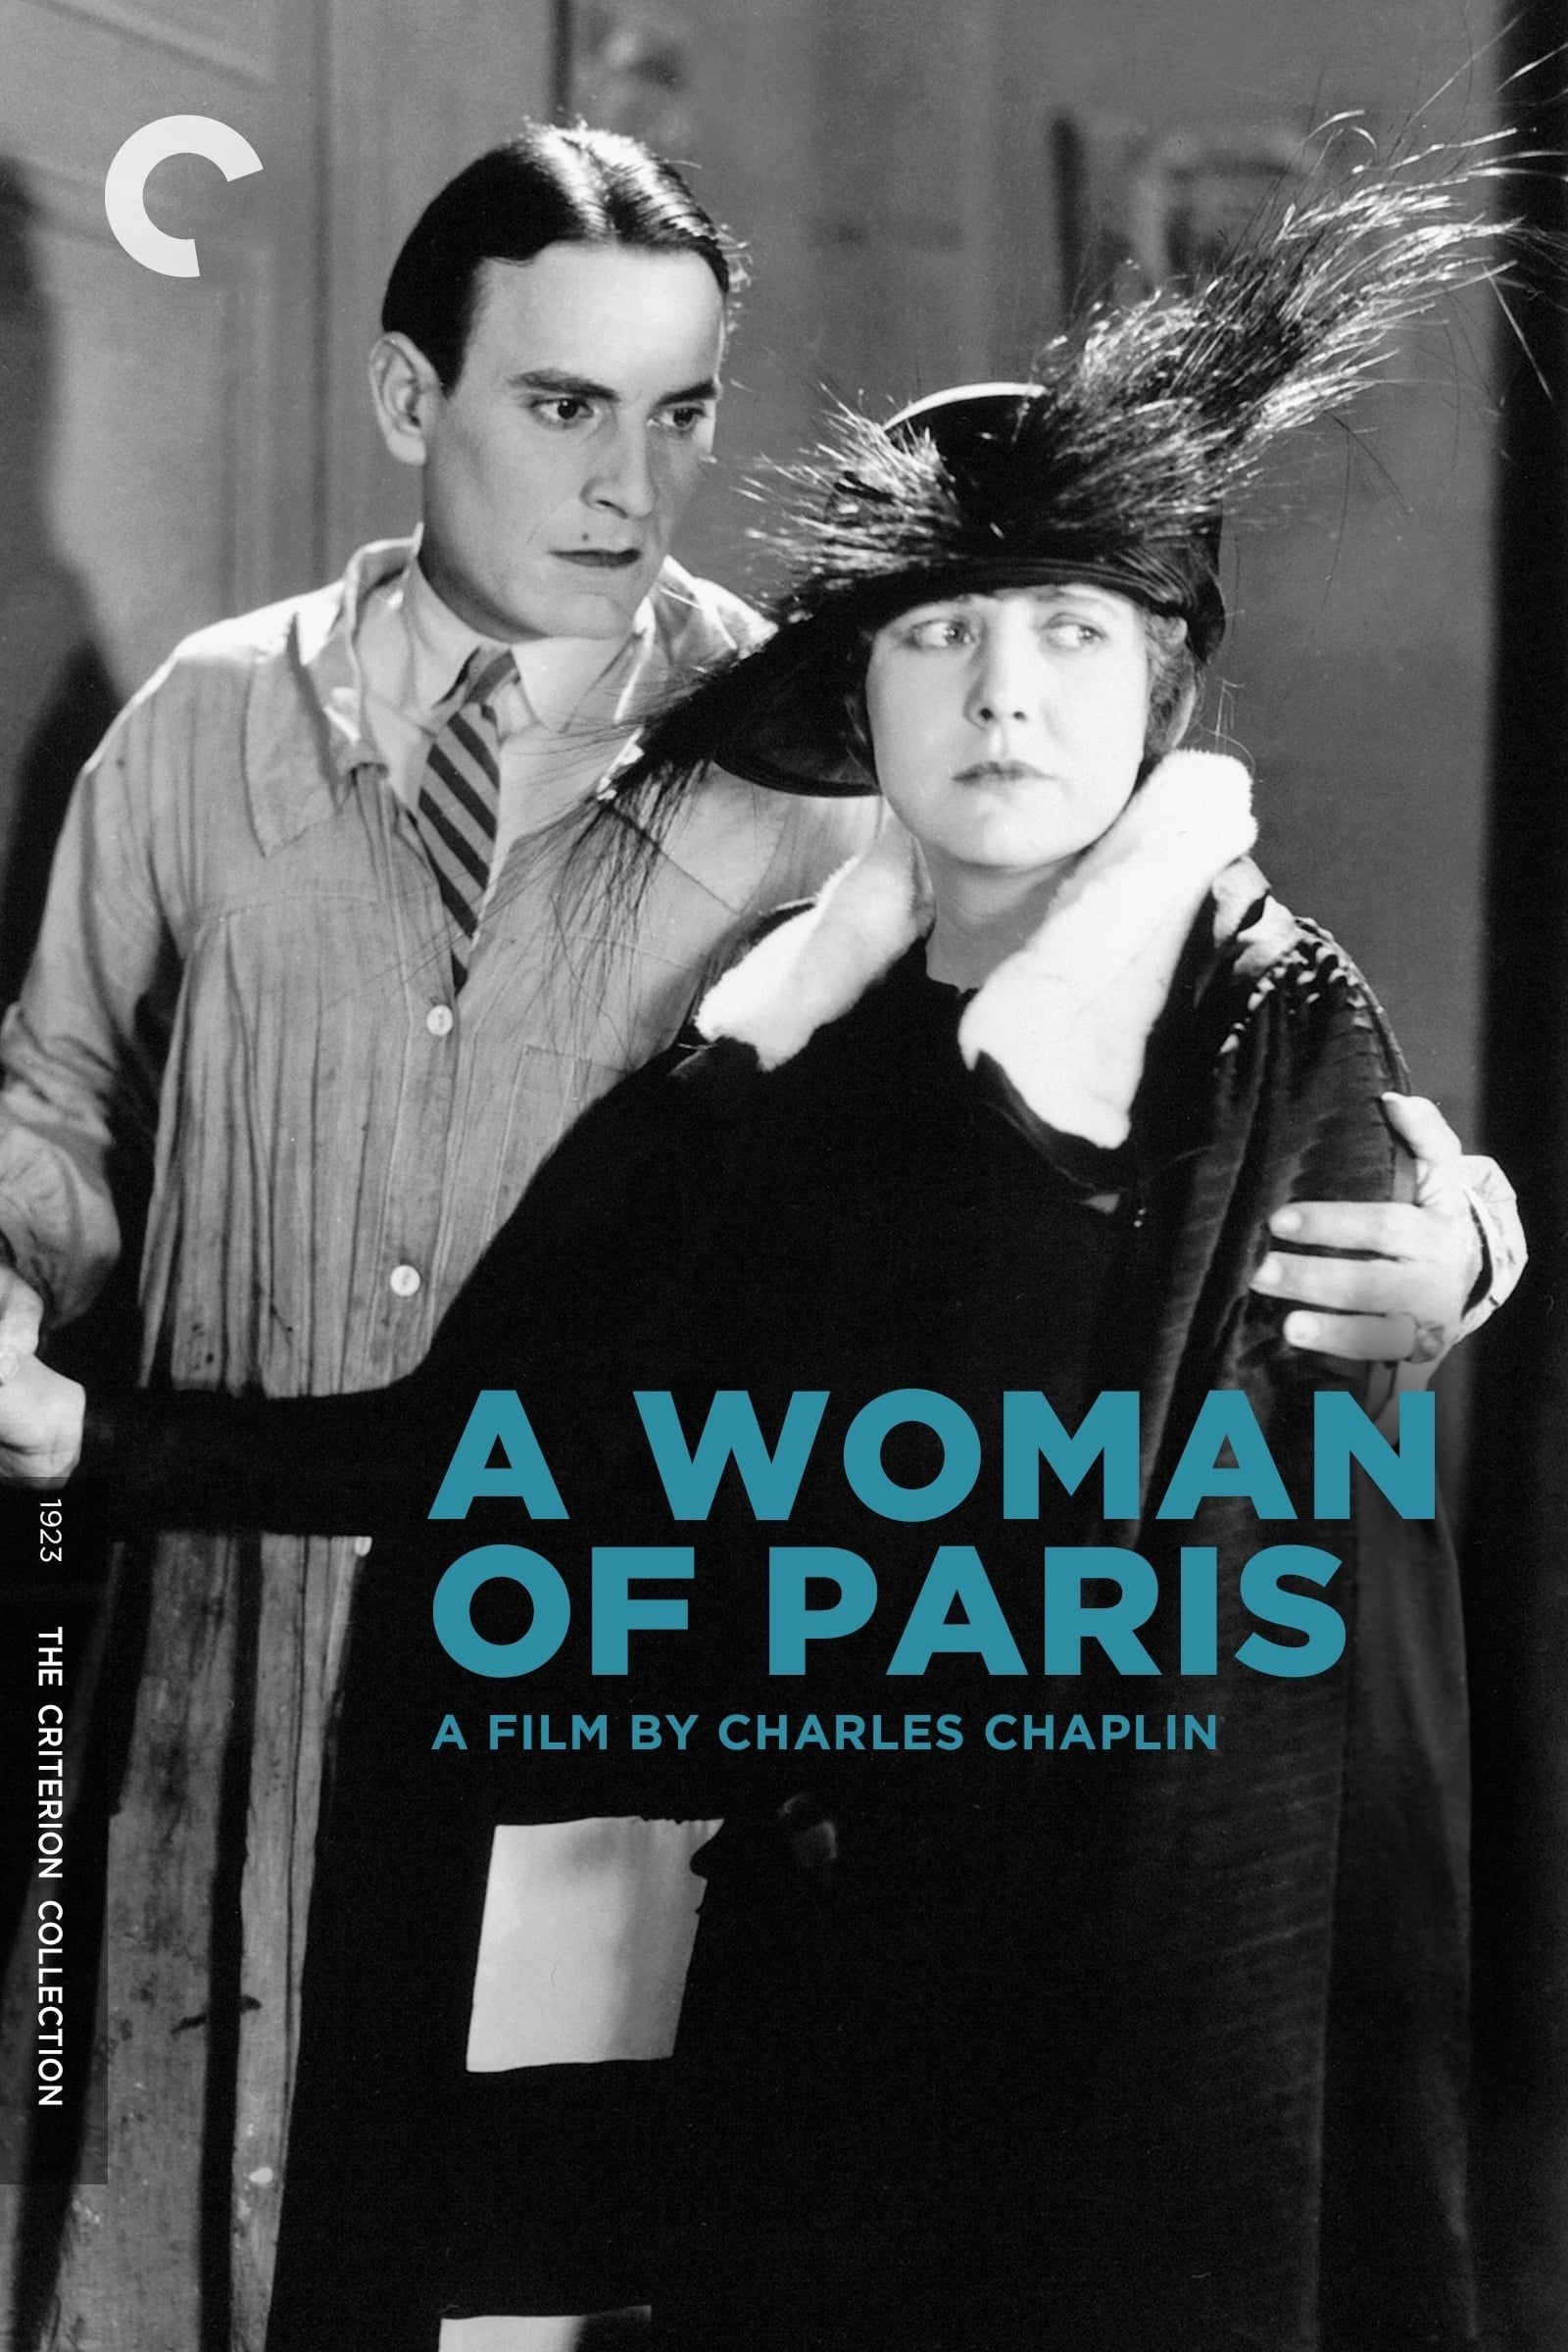 WOMAN OF PARIS: A DRAMA OF FATE